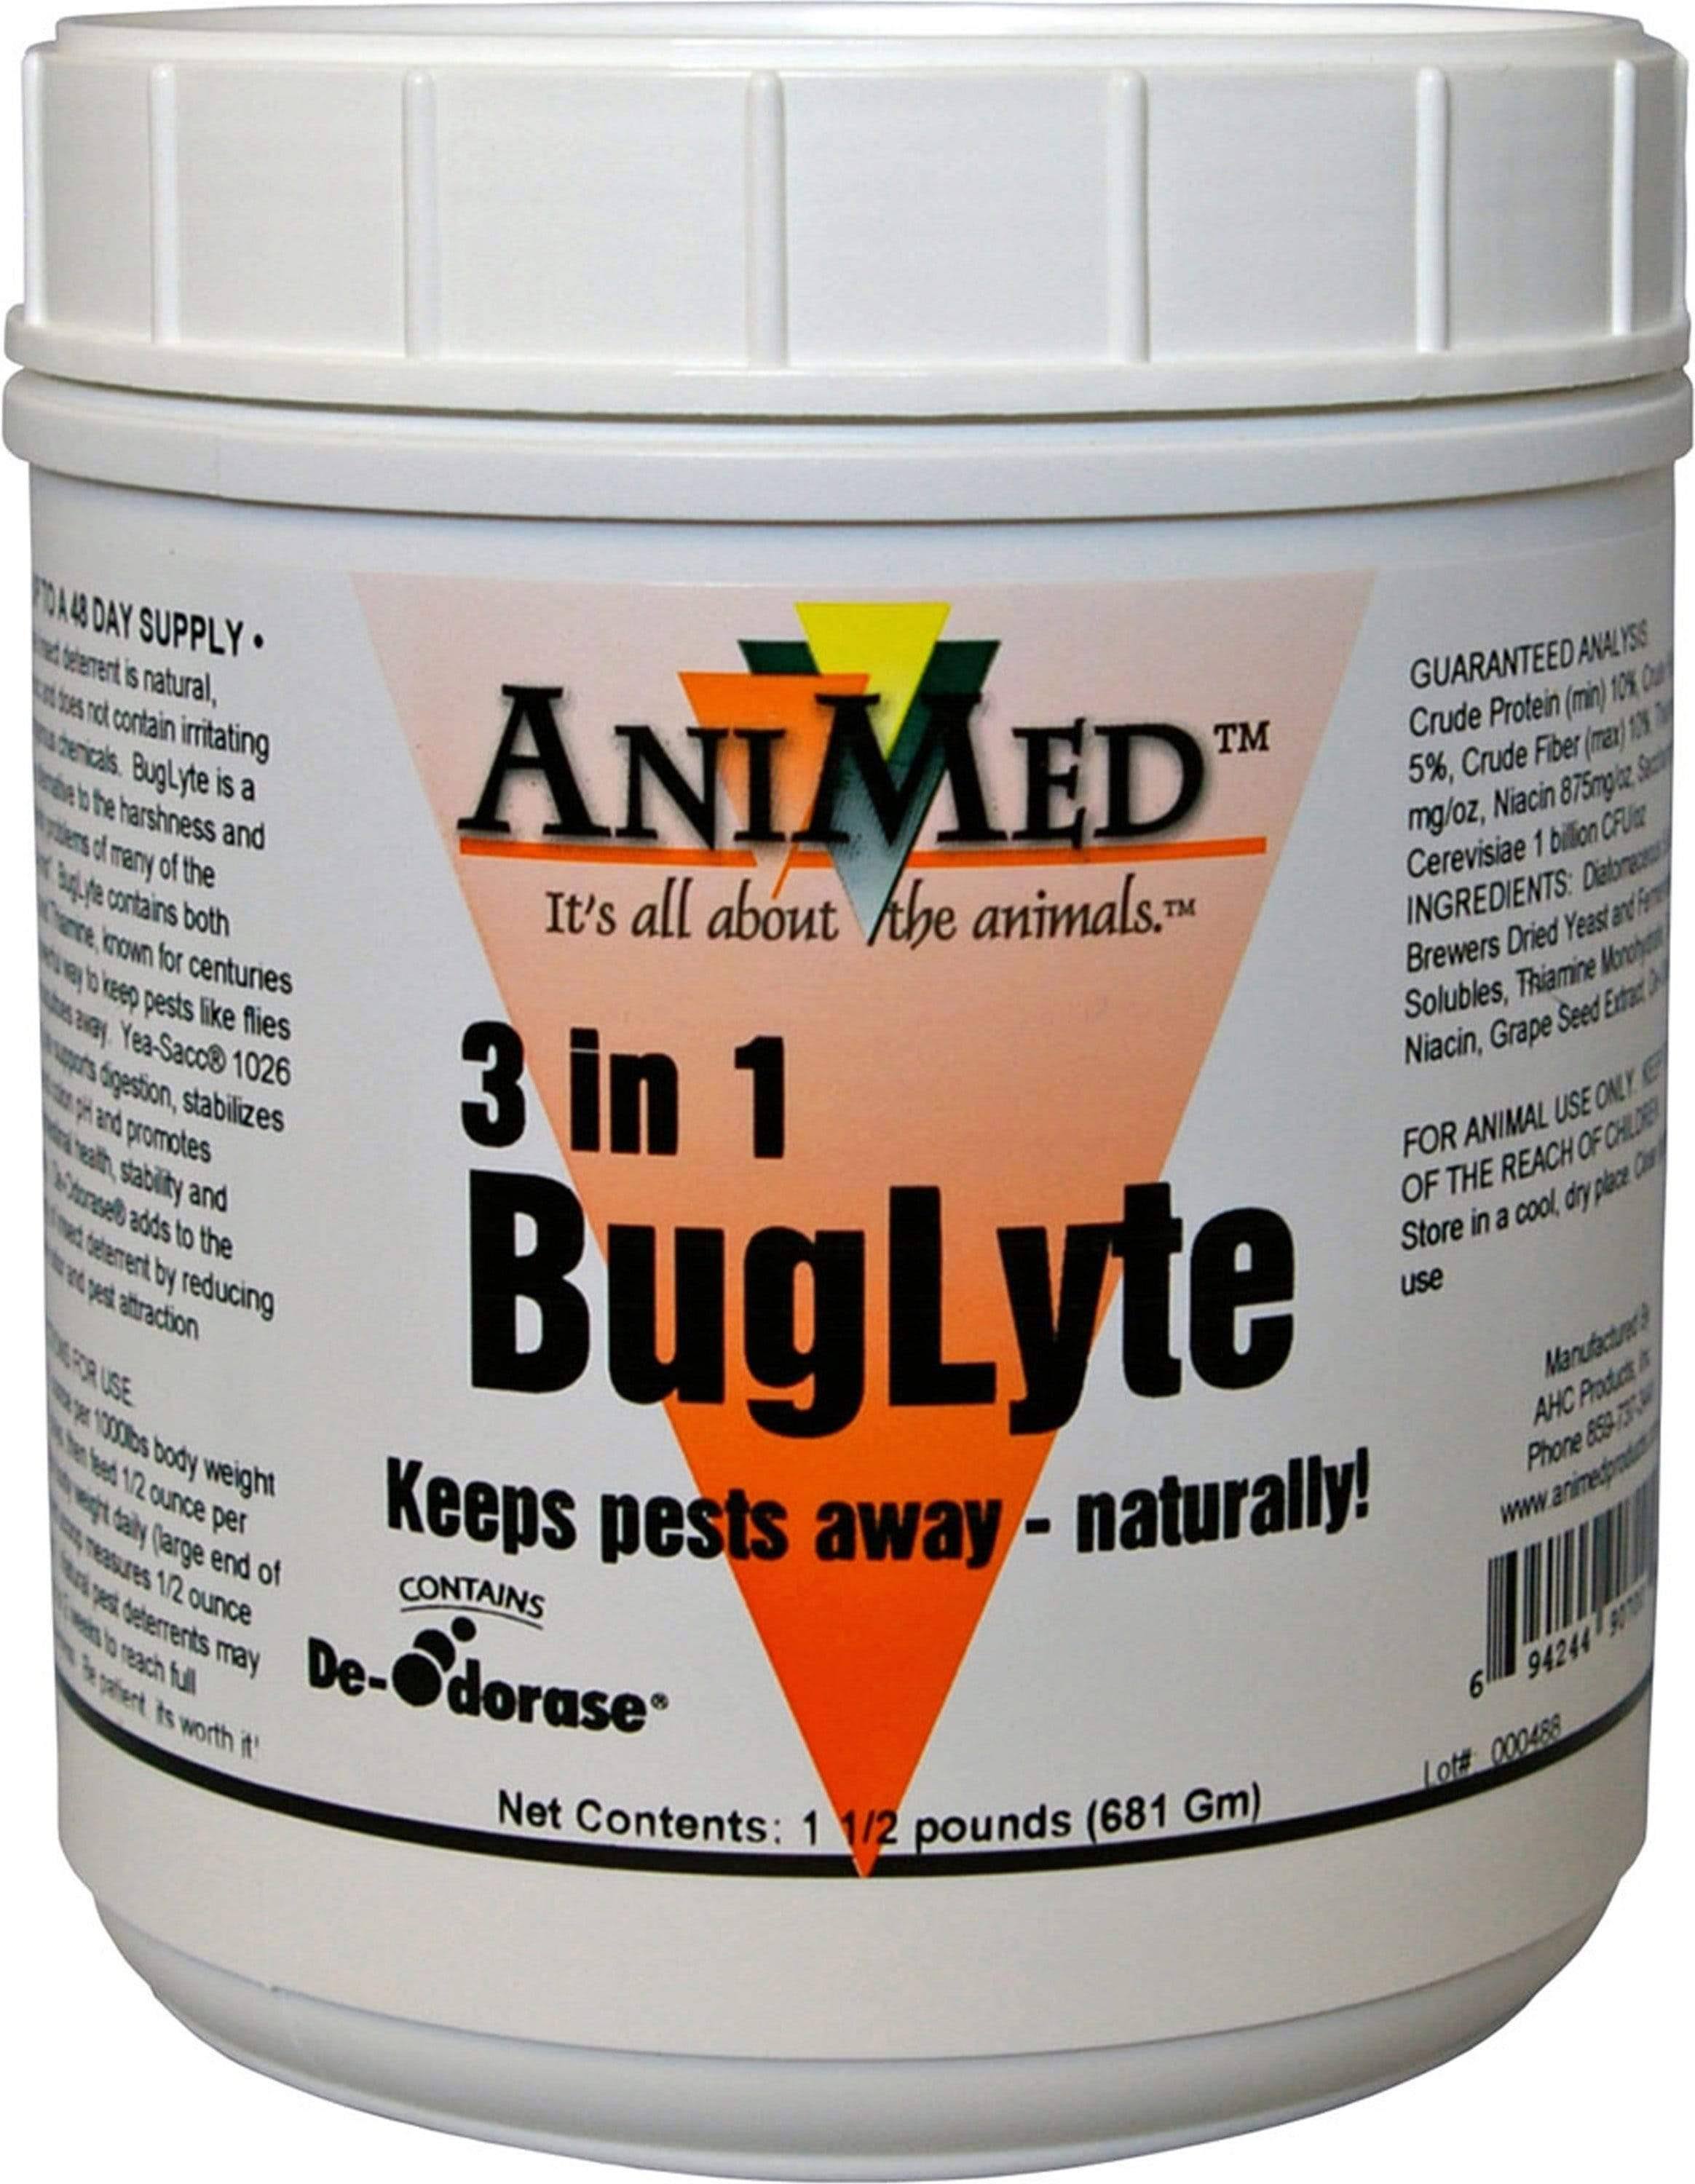 Ani Med Buglyte 3 In 1 Insecticide Supplement - 1.5lbs